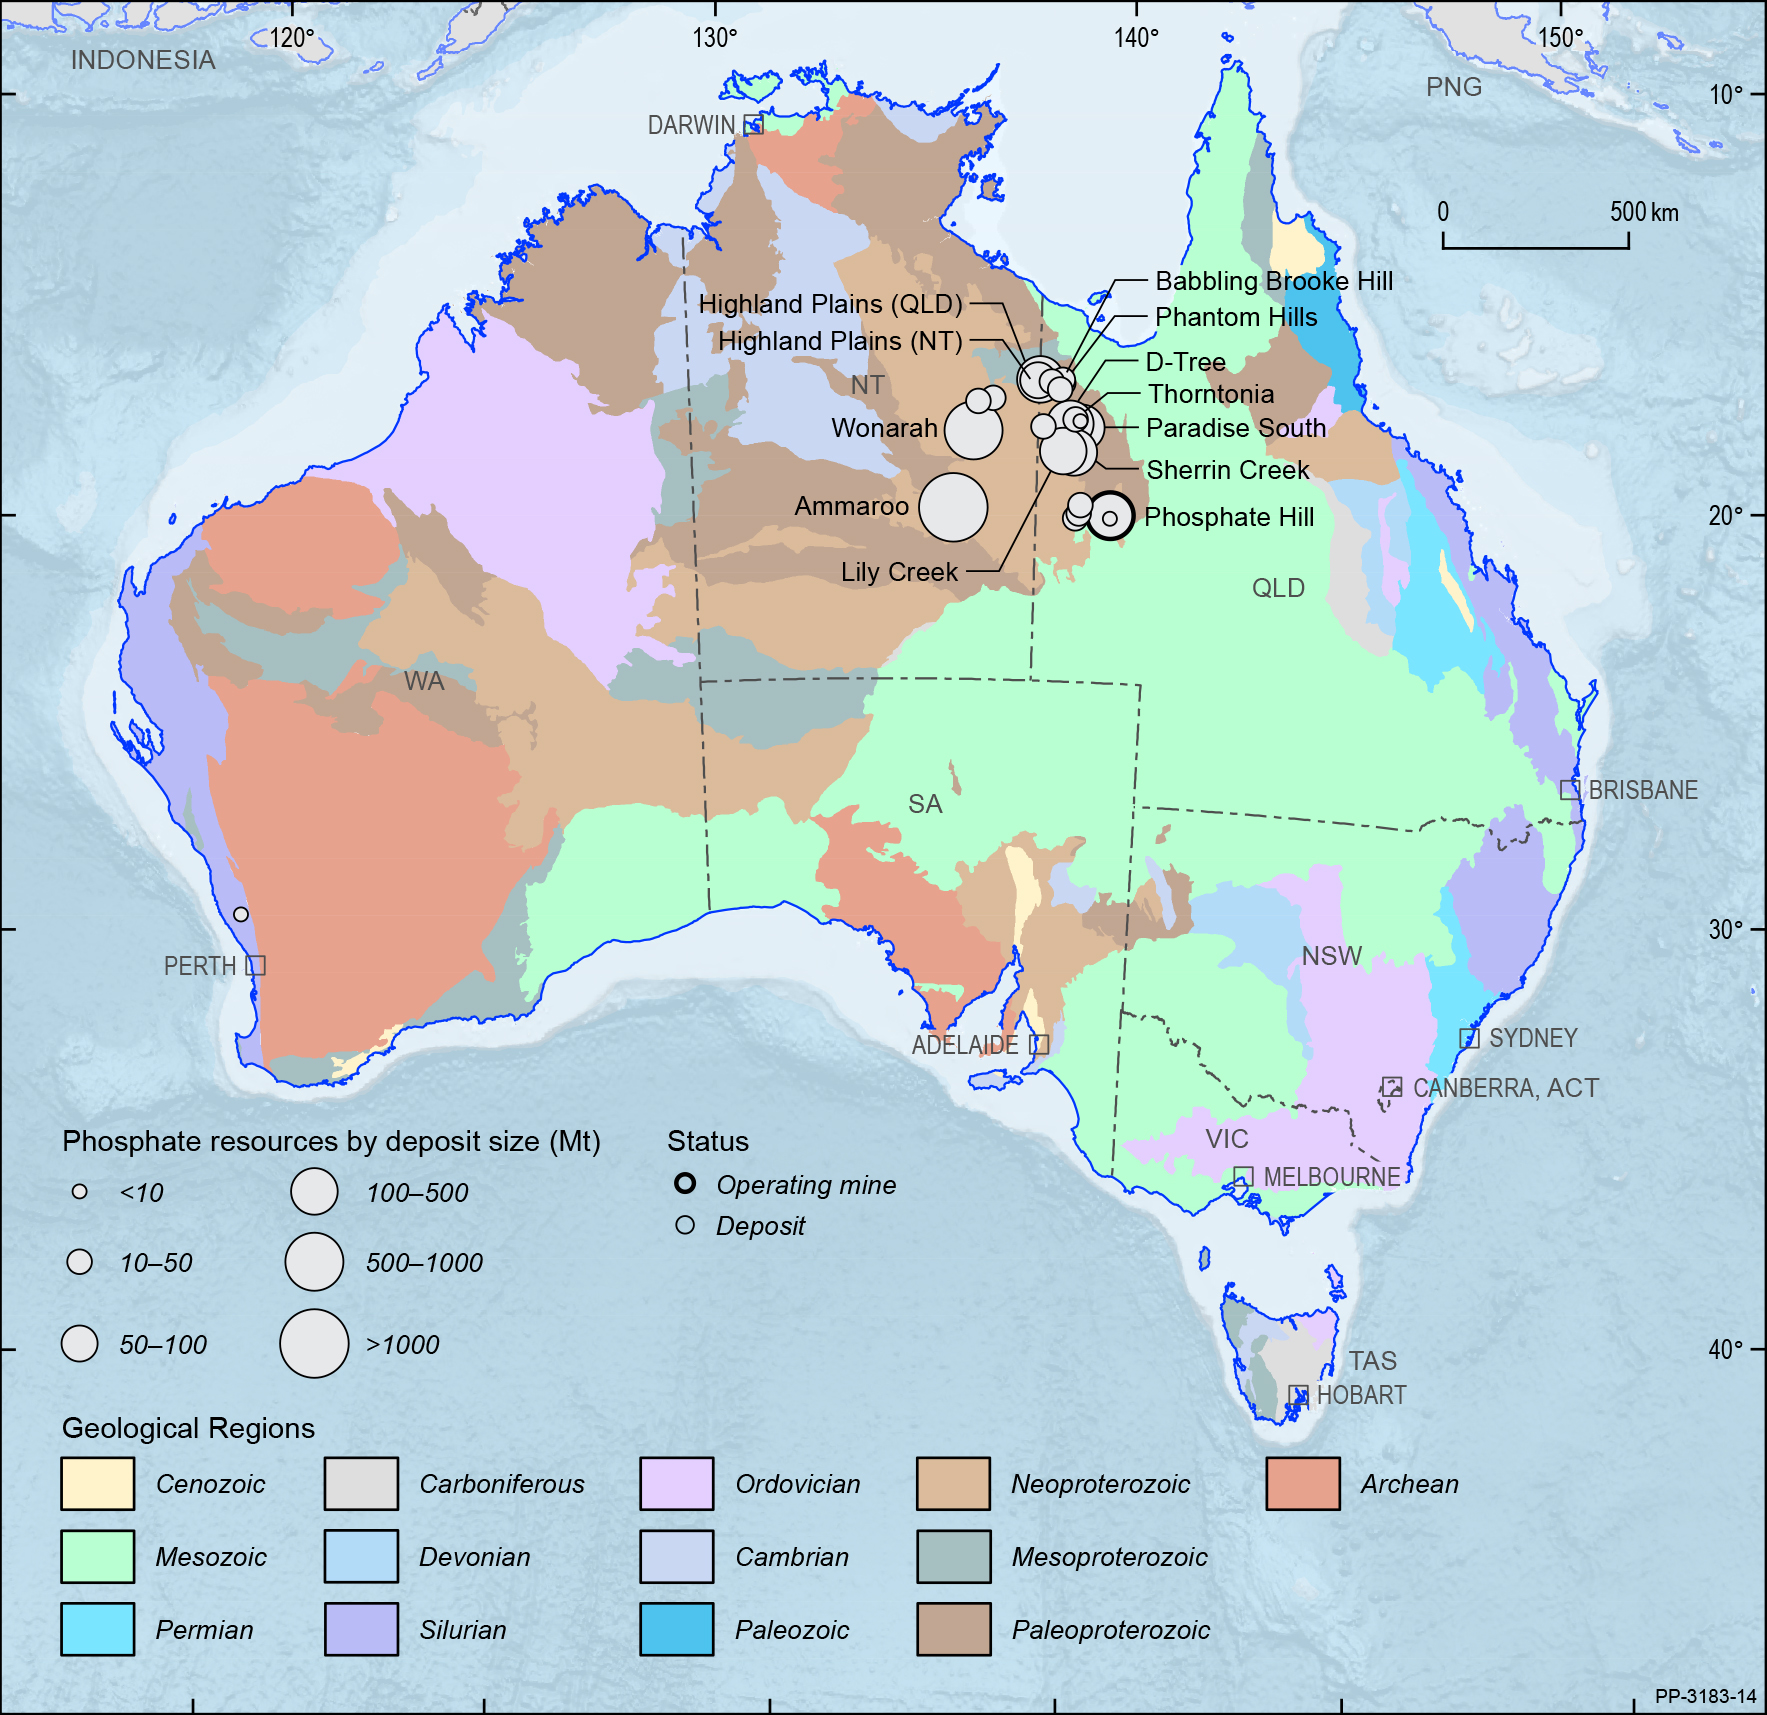 A map showing the Australian continent shaded by the ages of the main geological provinces highlighting the geographical distribution of Australian phosphate deposits and operating mines in 2019.